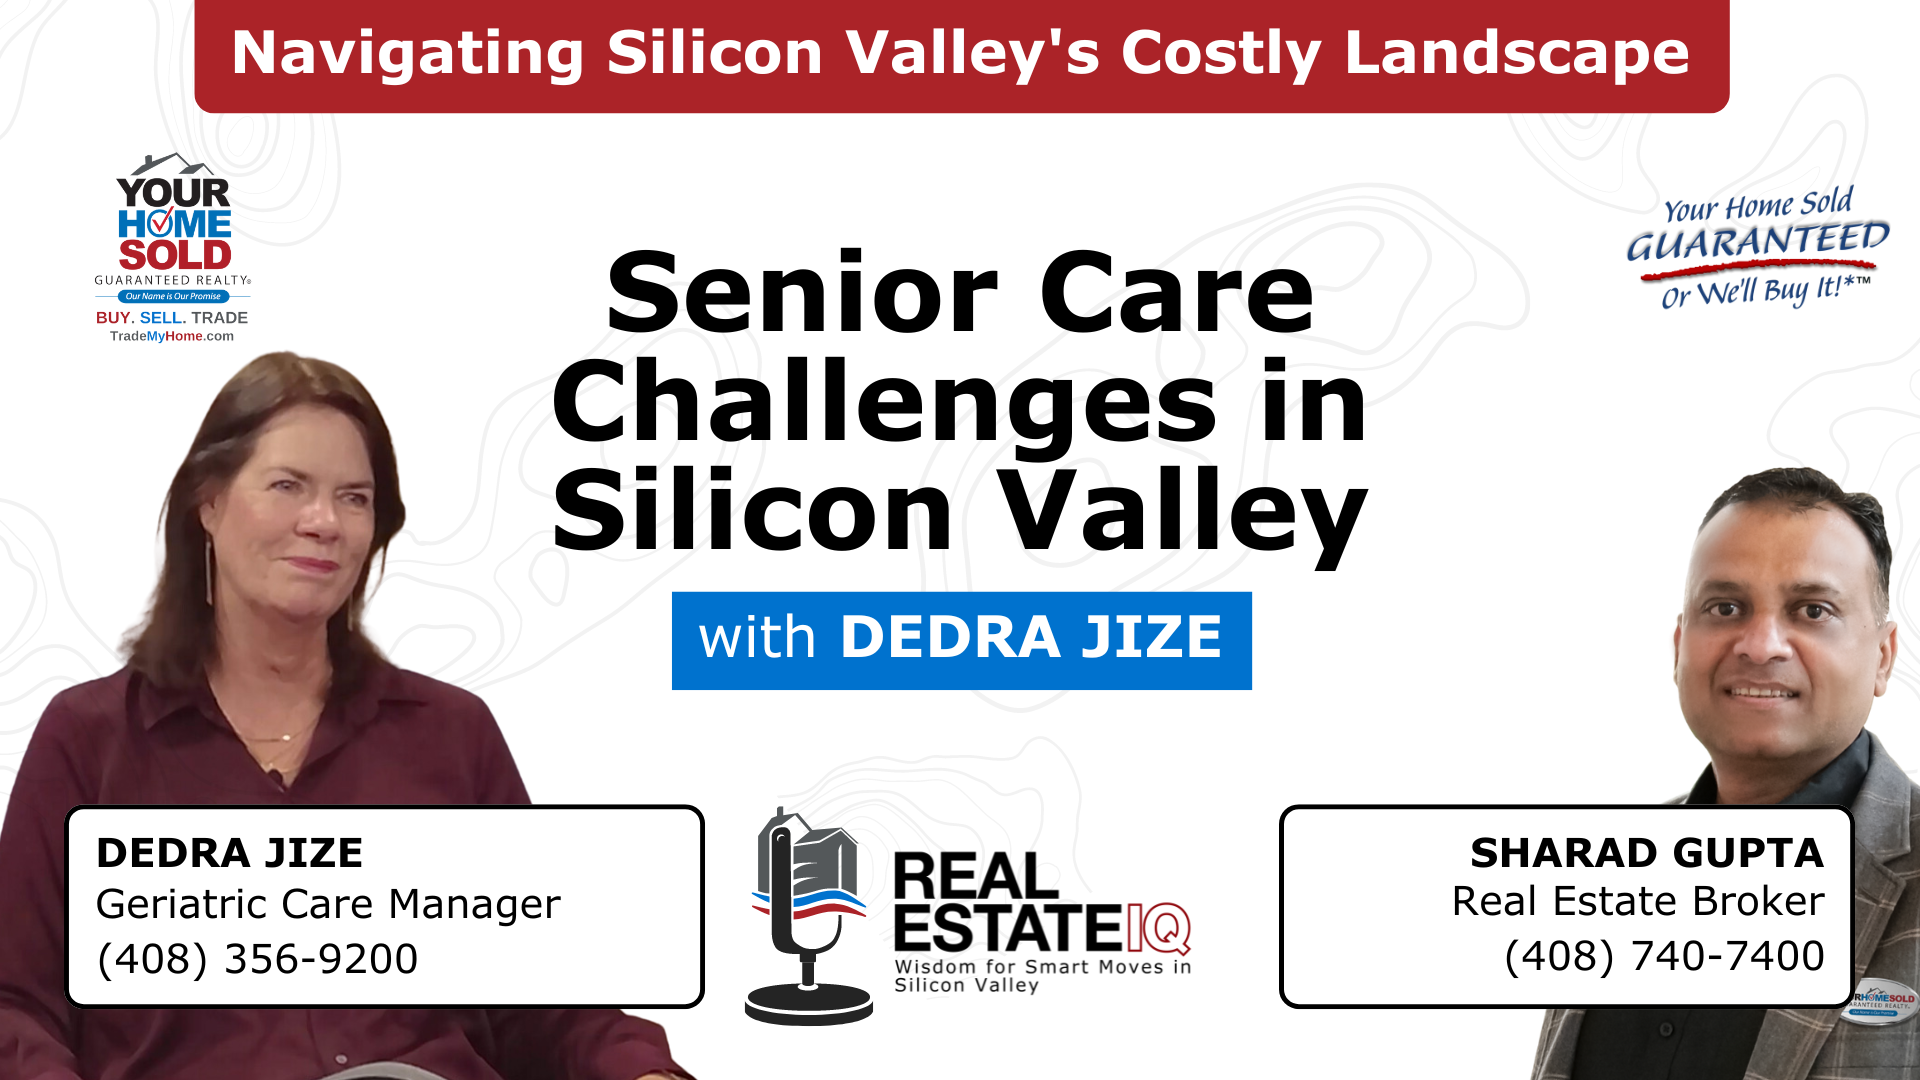 Senior Care Challenges: Navigating Silicon Valley’s Costly Landscape Video